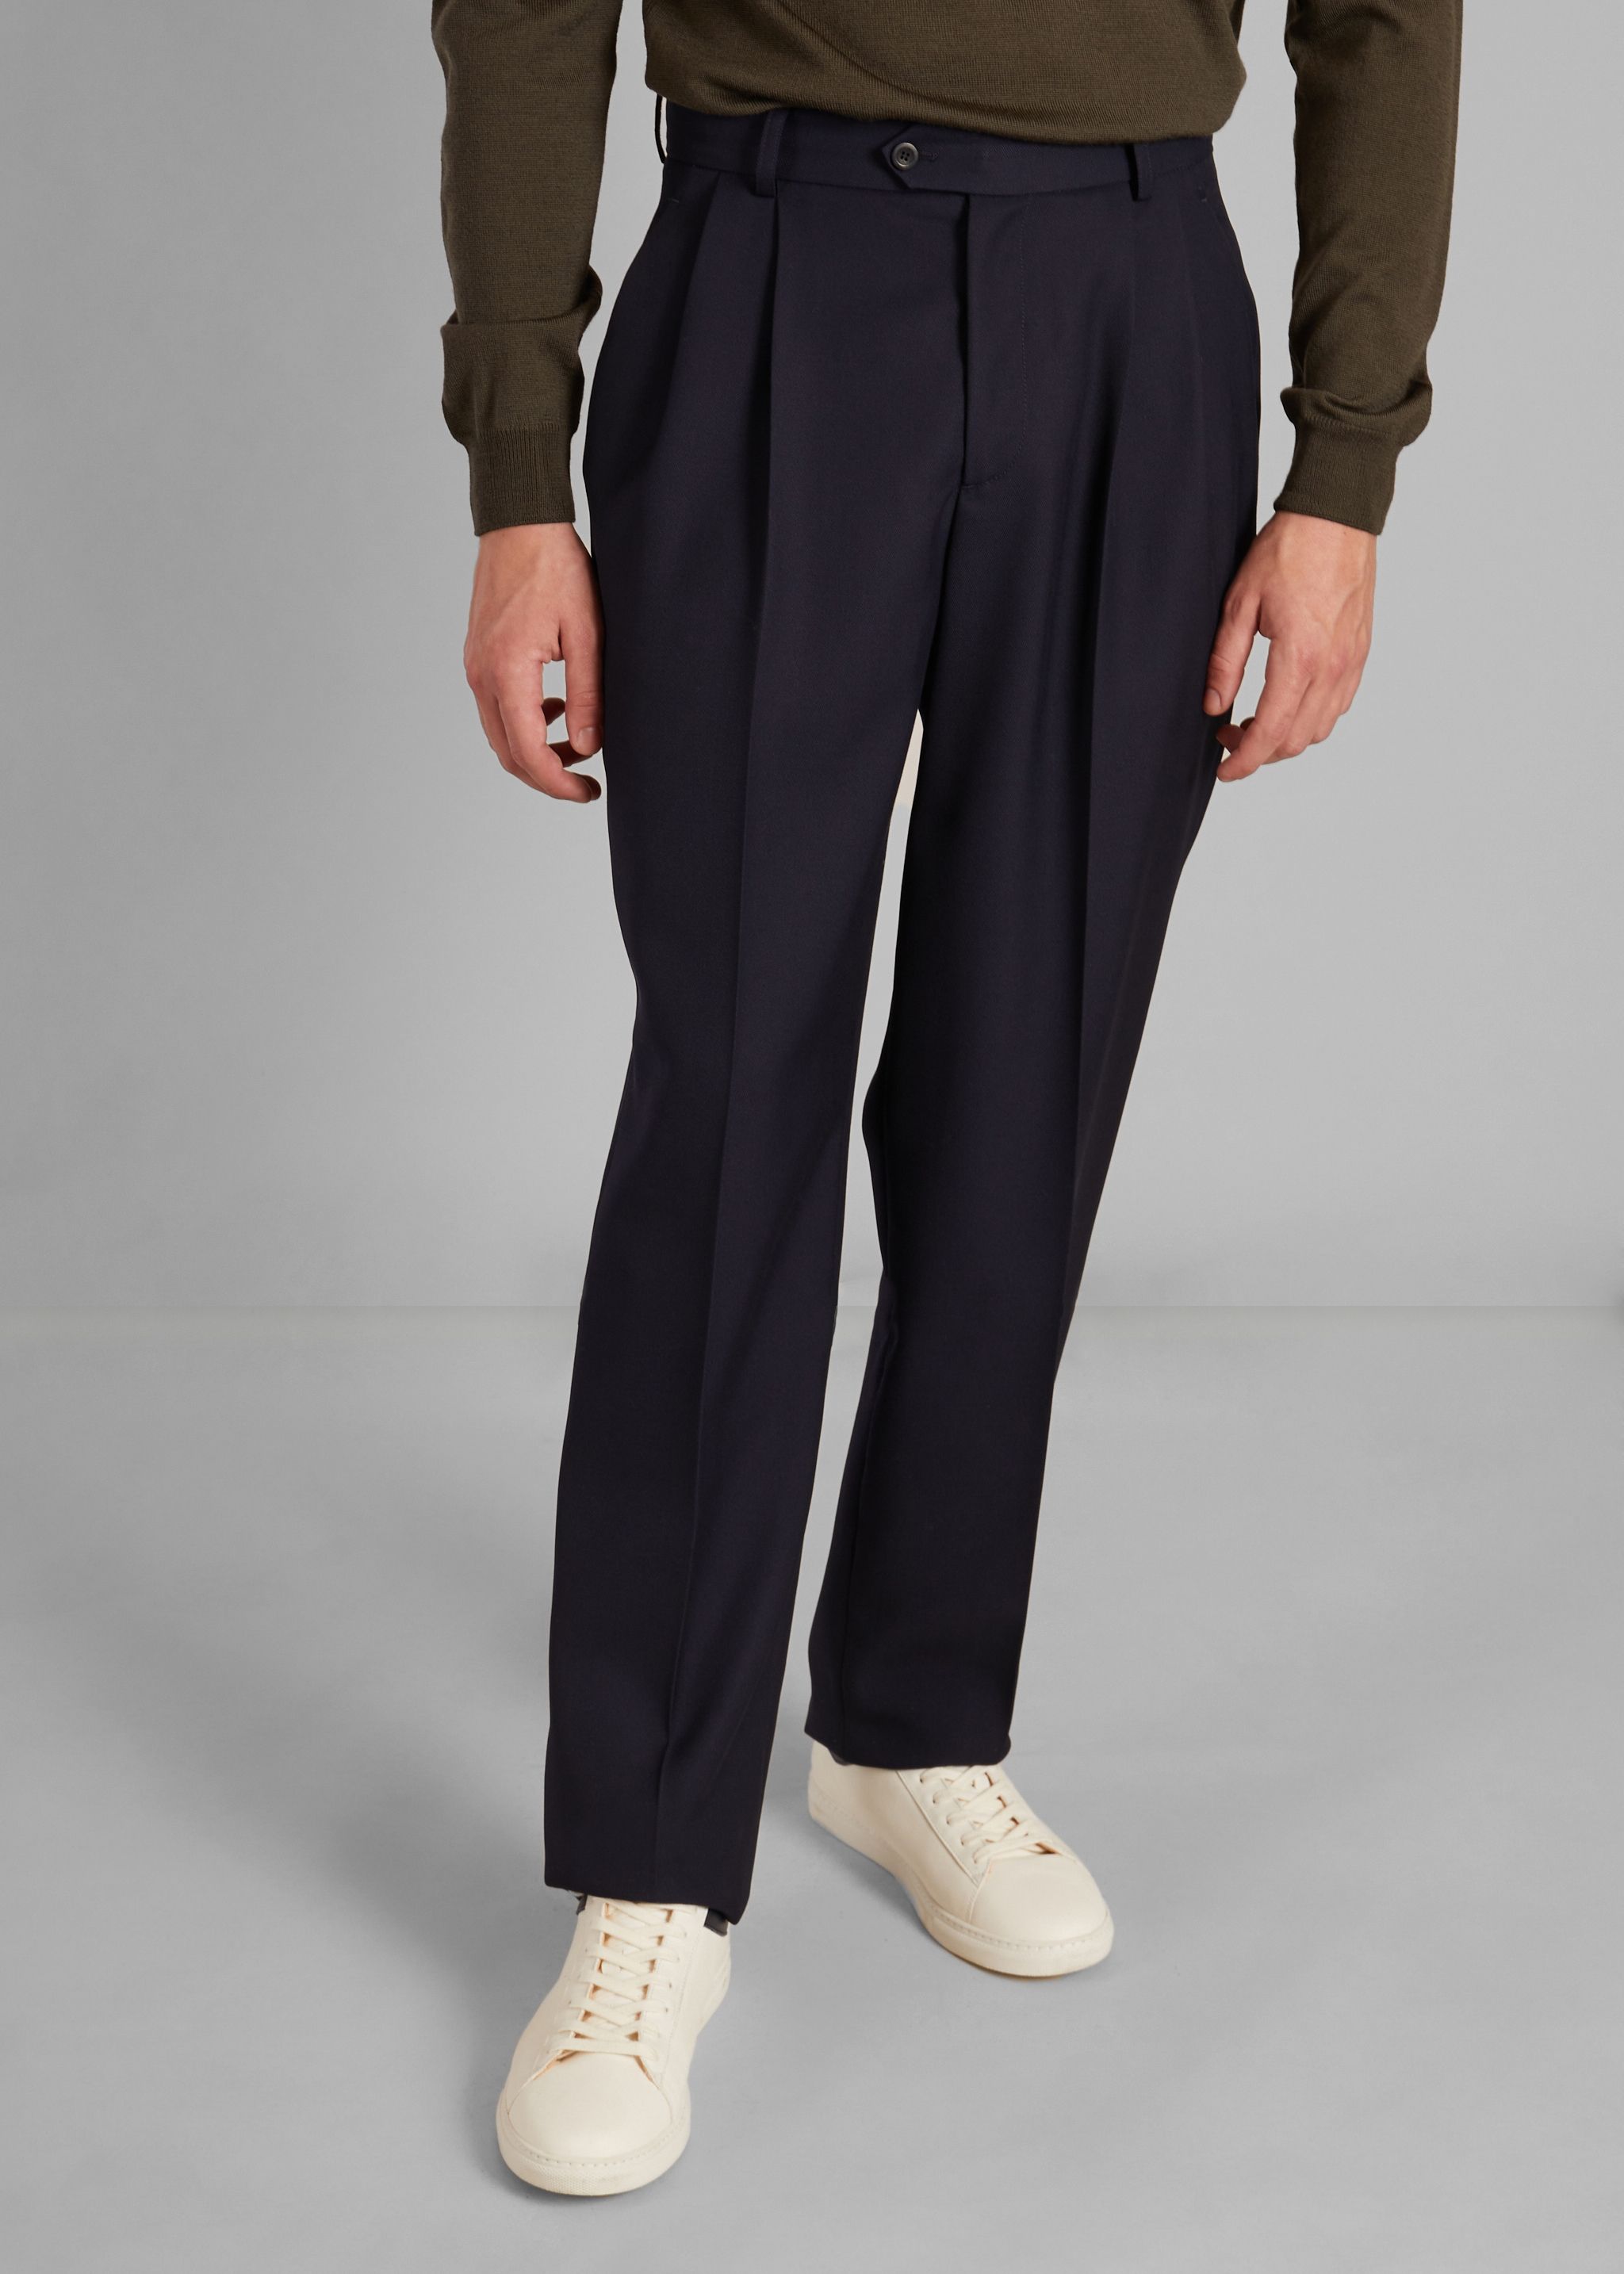 OffWhite TAILORING Doublepleated Twill Wool Pants men  Glamood Outlet